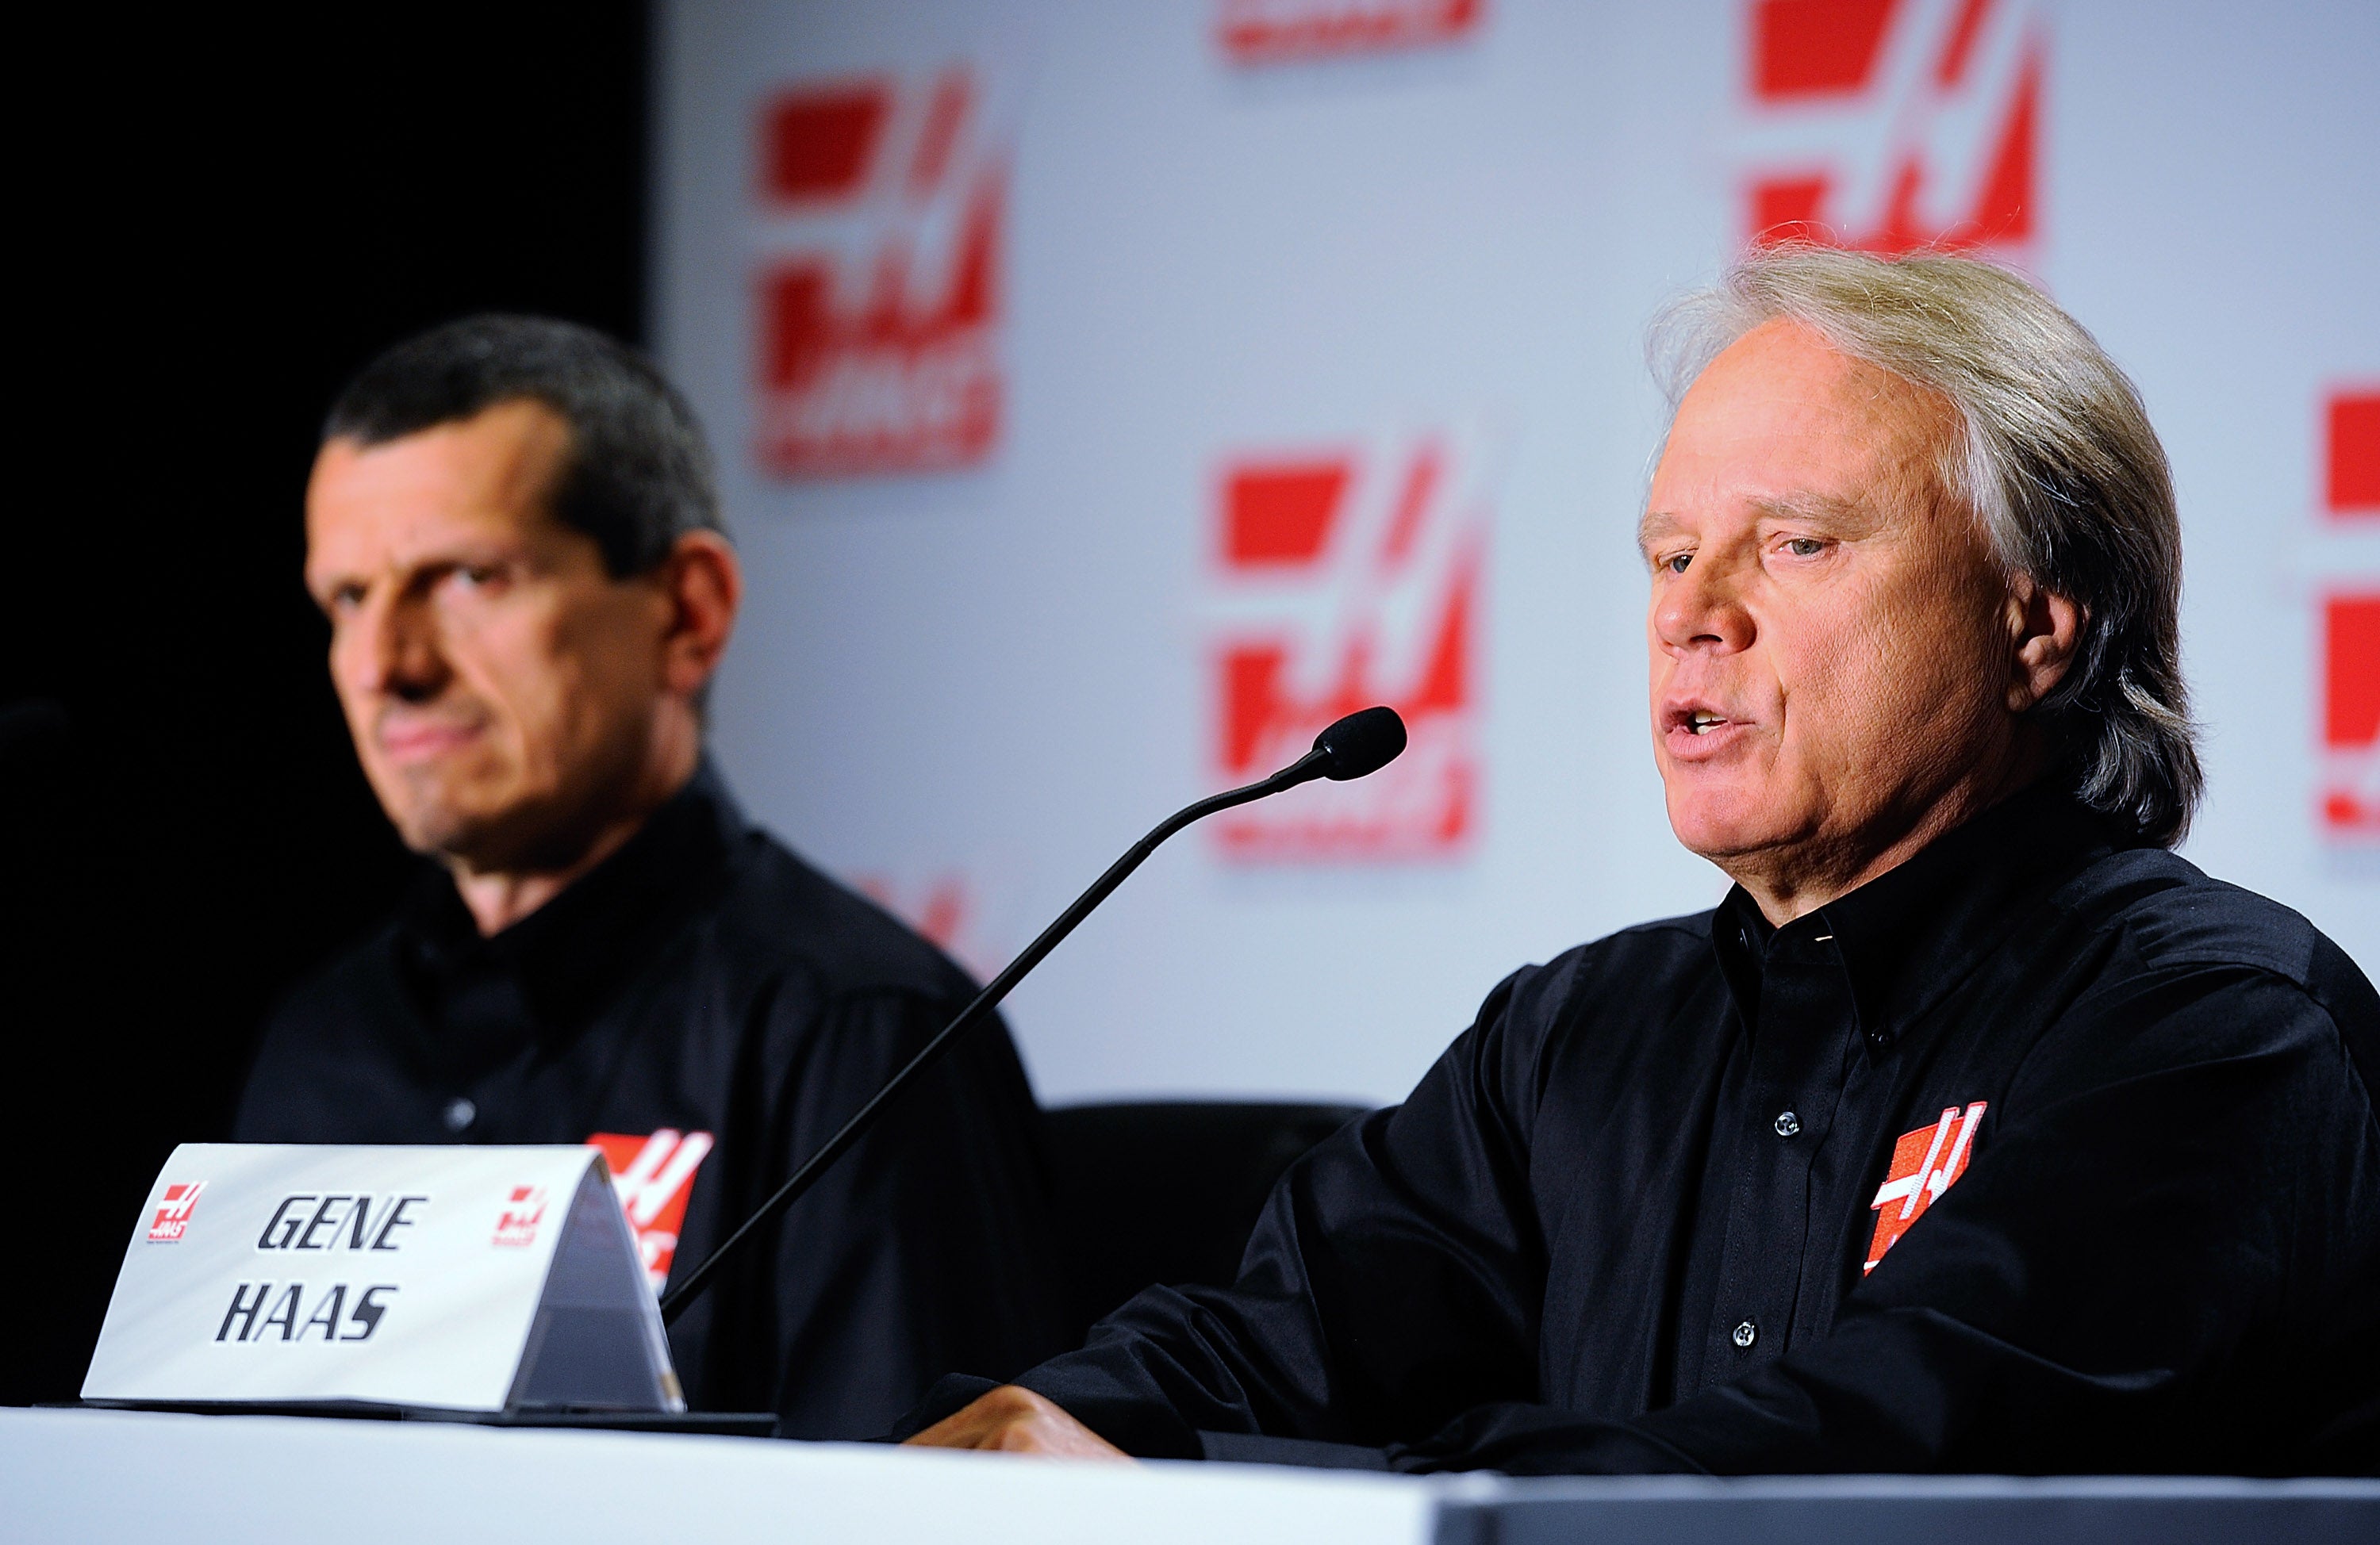 Gene Haas (right) parted ways with Guenther Steiner earlier this week